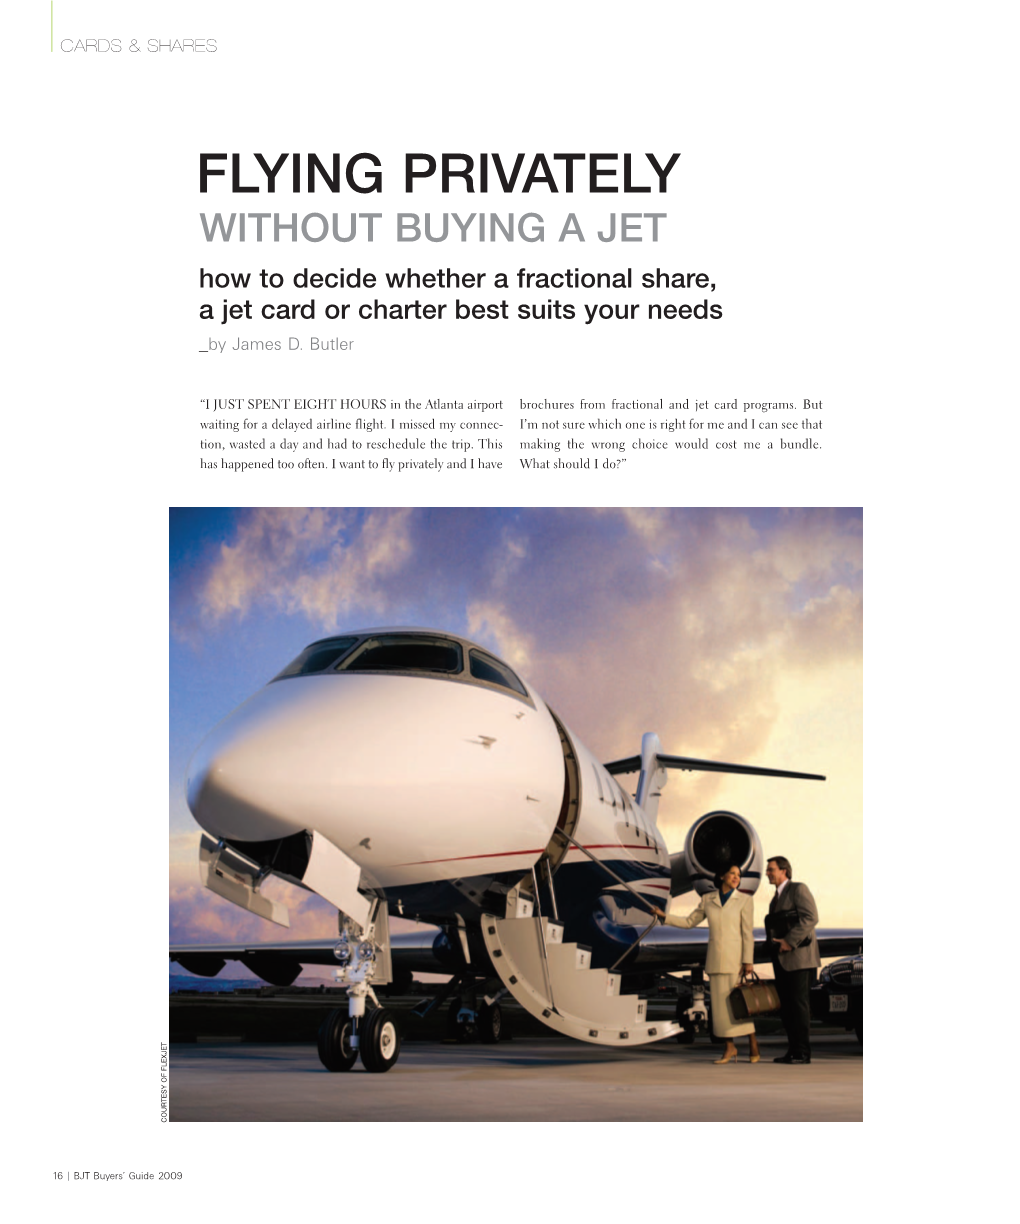 FLYING PRIVATELY WITHOUT BUYING a JET How to Decide Whether a Fractional Share, a Jet Card Or Charter Best Suits Your Needs by James D